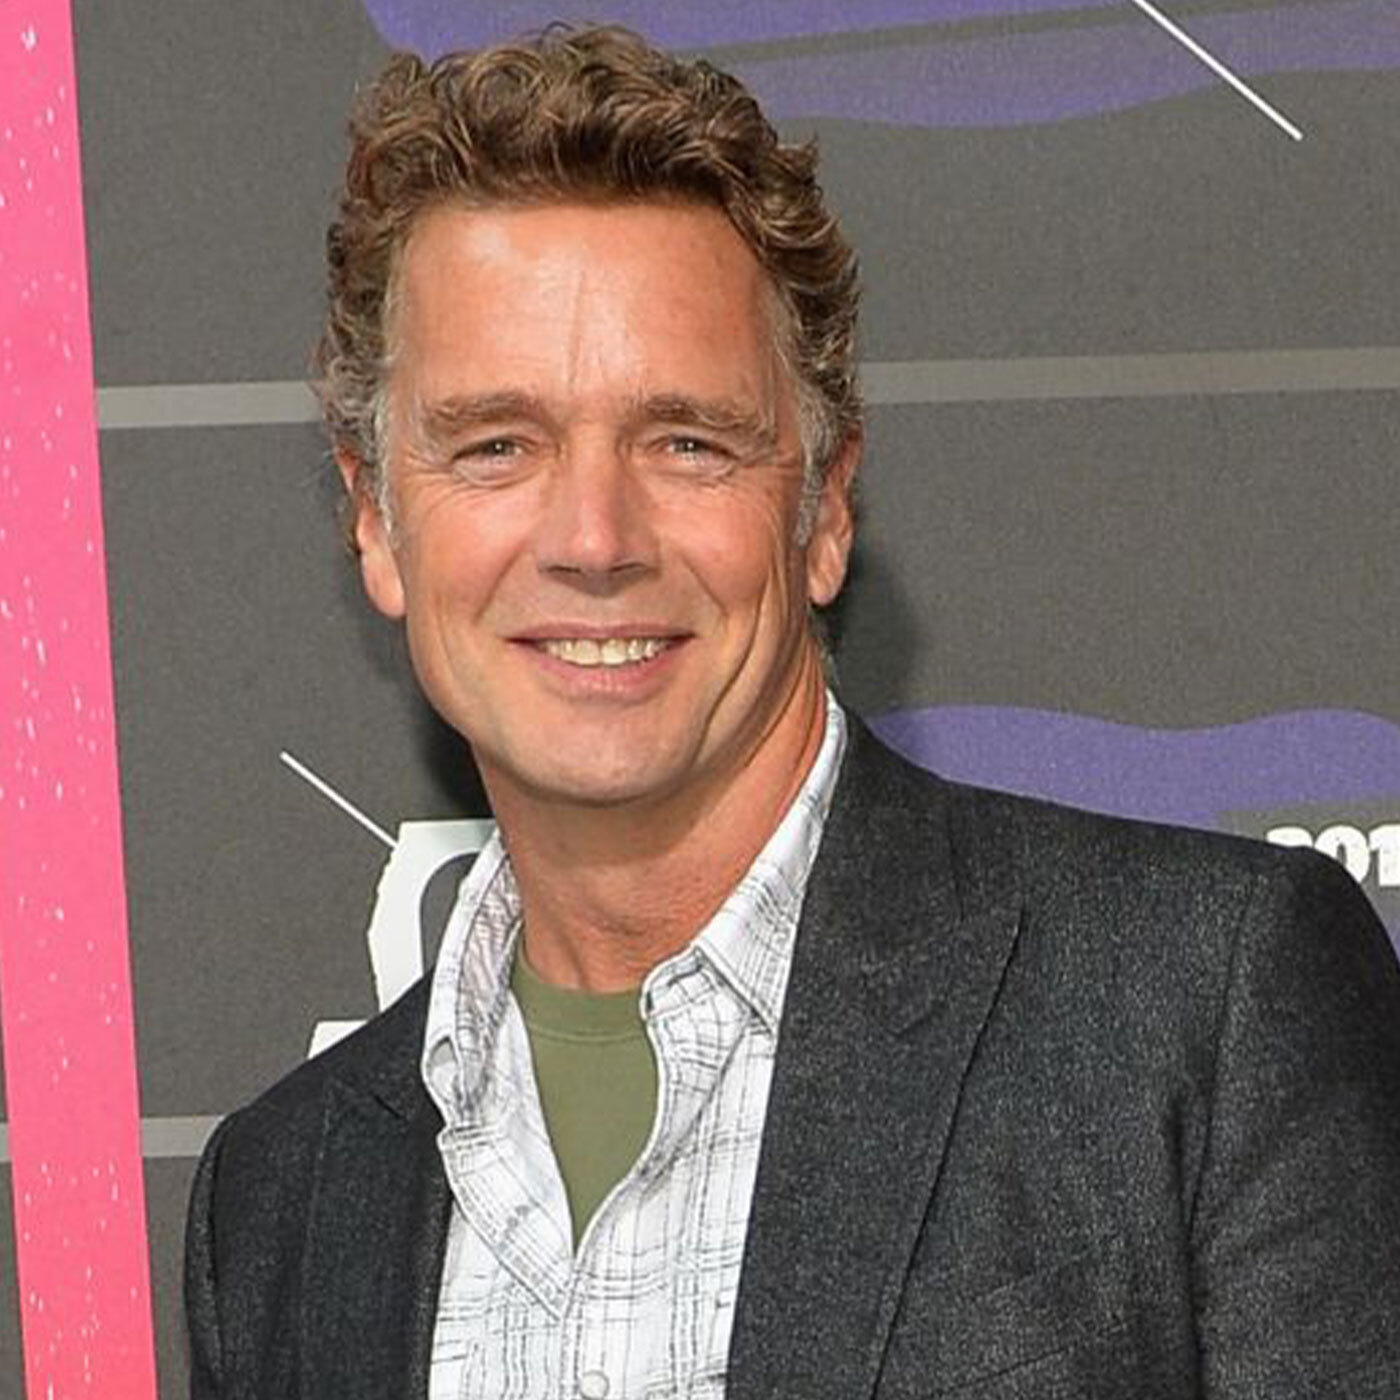 John Schneider from Dukes of Hazzard fame talks about his new movie